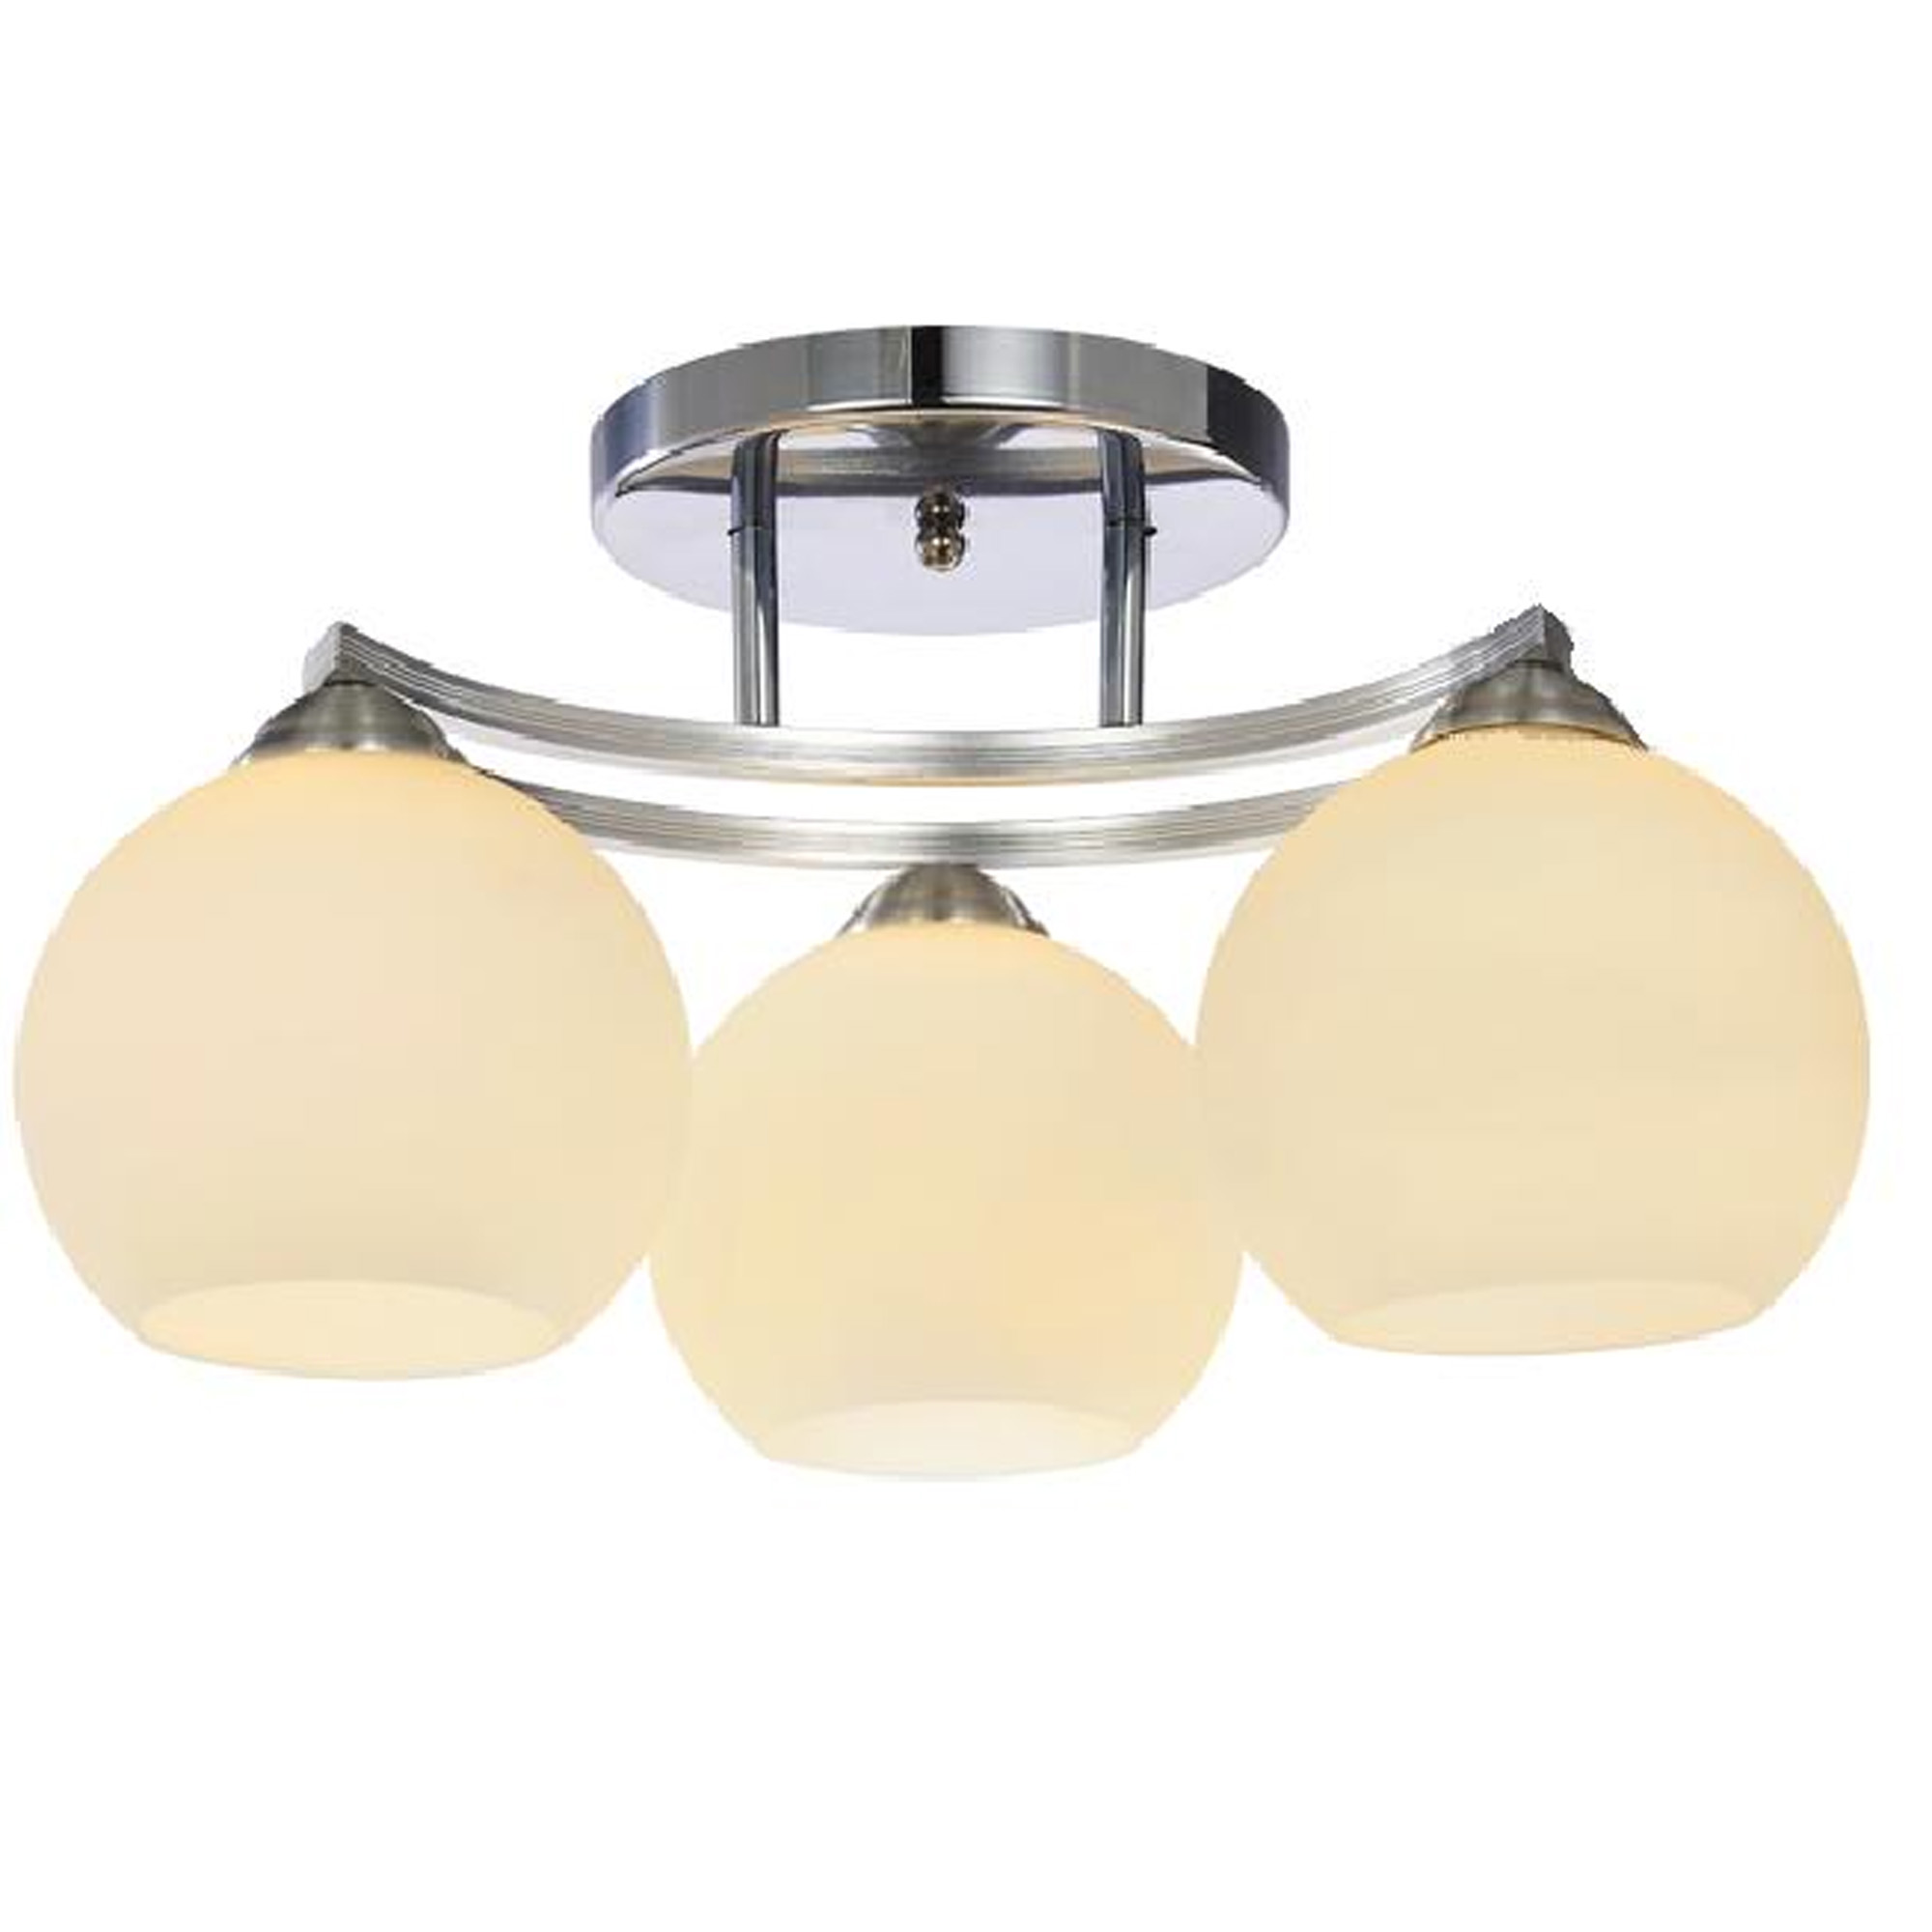 European-Style  ceiling lamp HL-9530-3X-1.European-Style  ceiling lamp HL-9530-3X  2.About shipping company:If you need help selecting a fast and reliable shipping company, please contact us direct and we will do our best to help you .